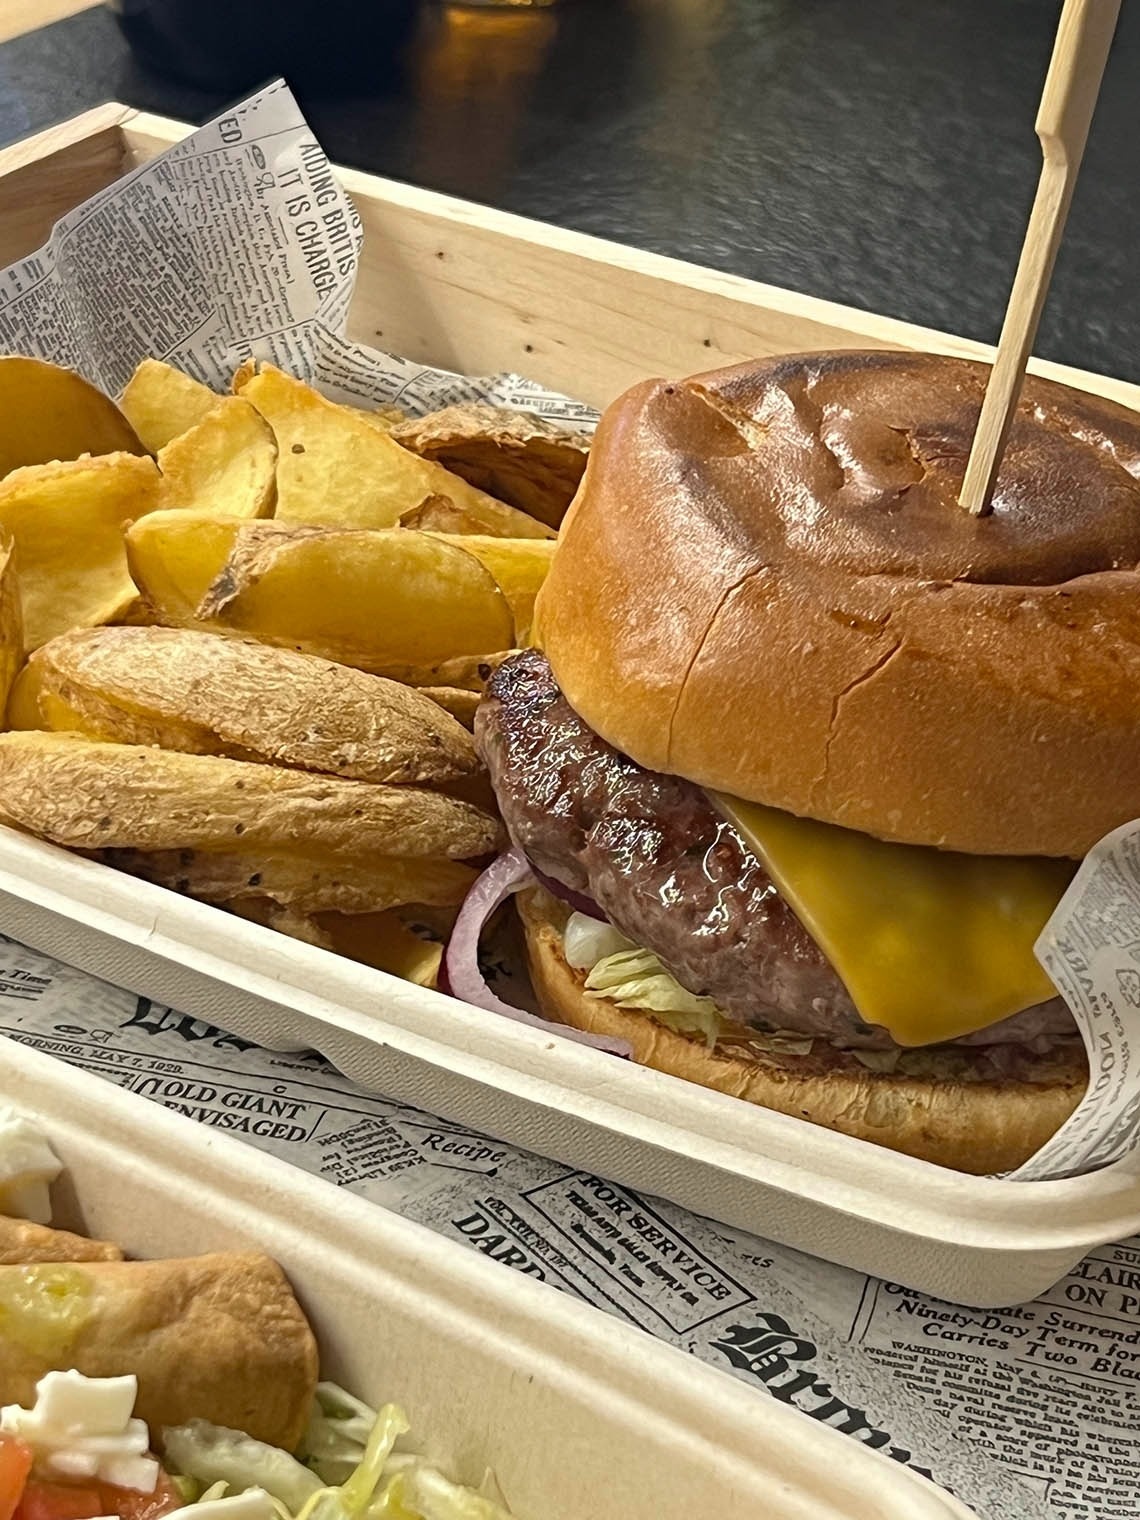 a hamburger with a toothpick sticking out of it is in a container with french fries